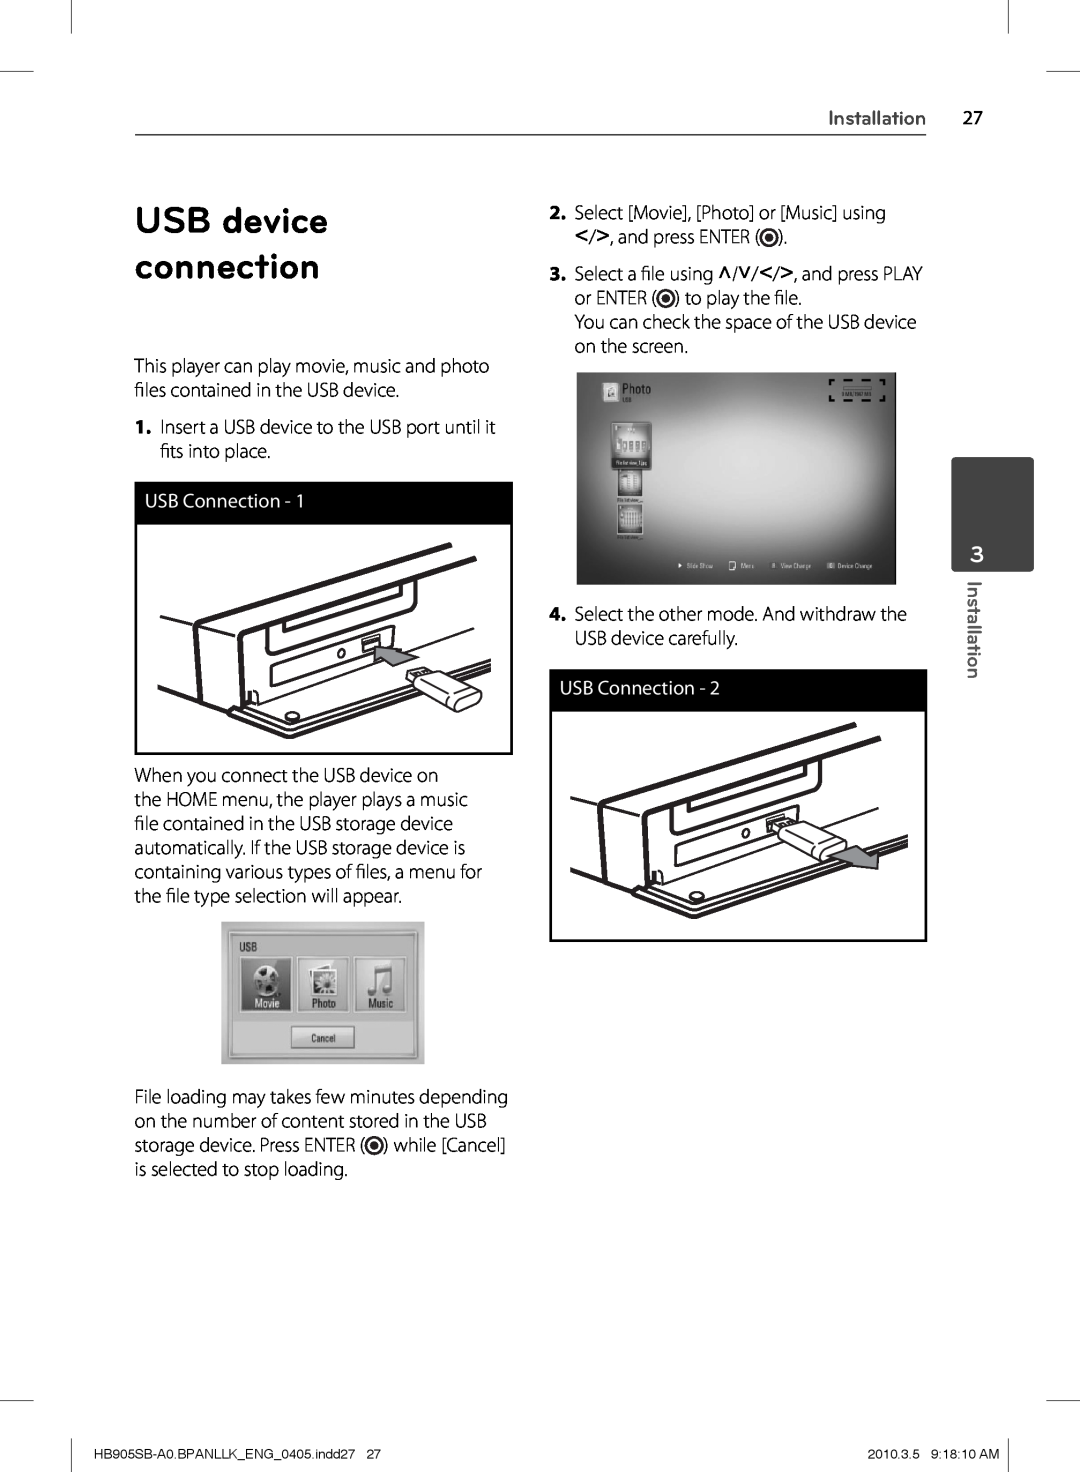 LG Electronics HB905SB owner manual USB device, connection, USB Connection, Installation 